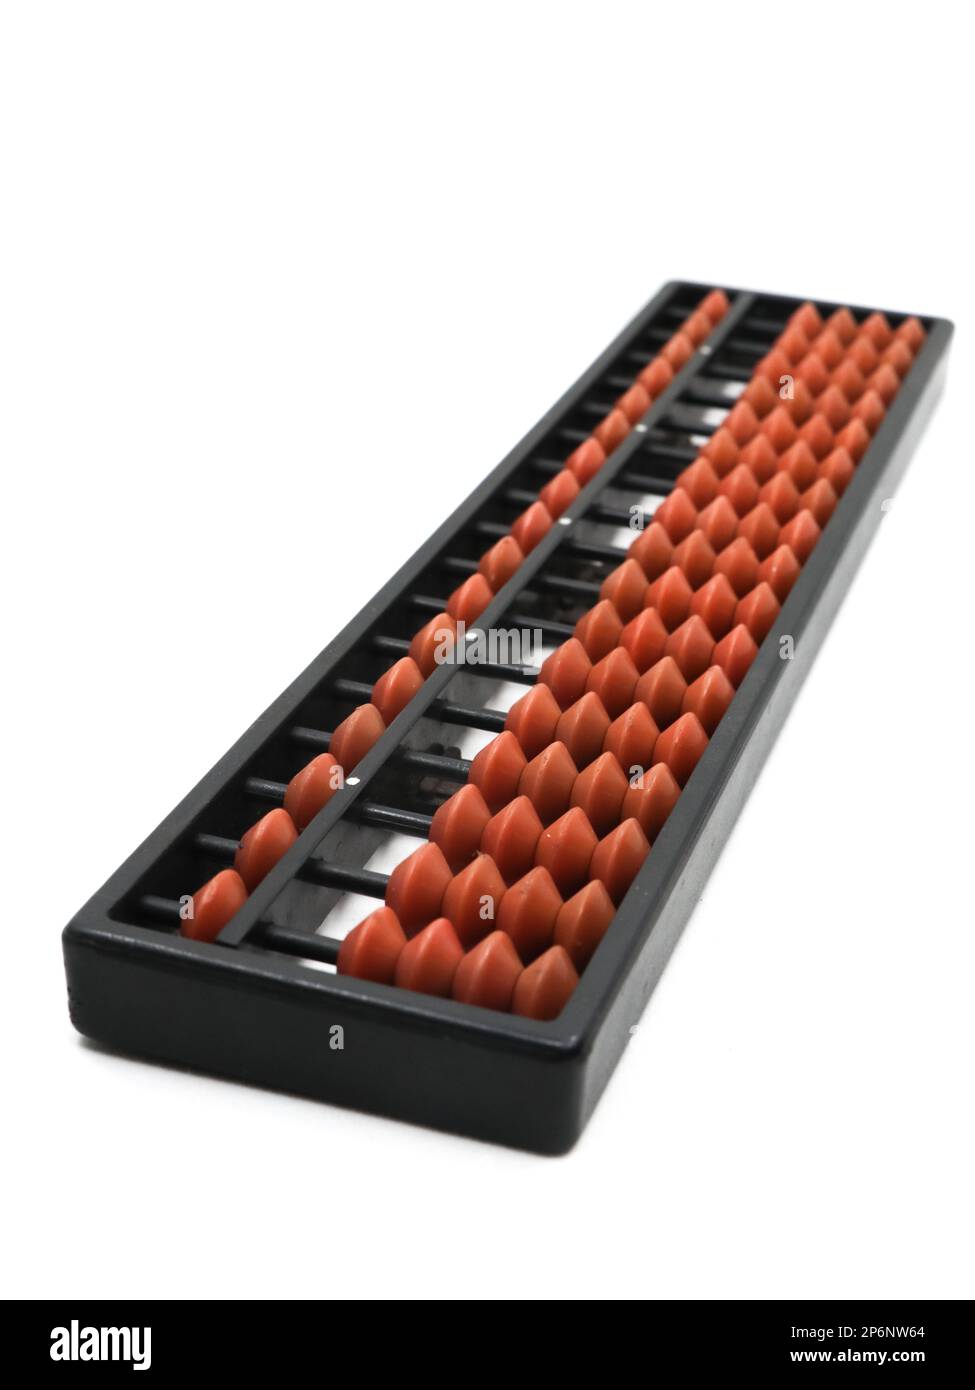 Modern Calculator Stands Next To Abacus for Mental Arithmetic. Concept of  Learning Mathematics Stock Image - Image of close, electronic: 253073075